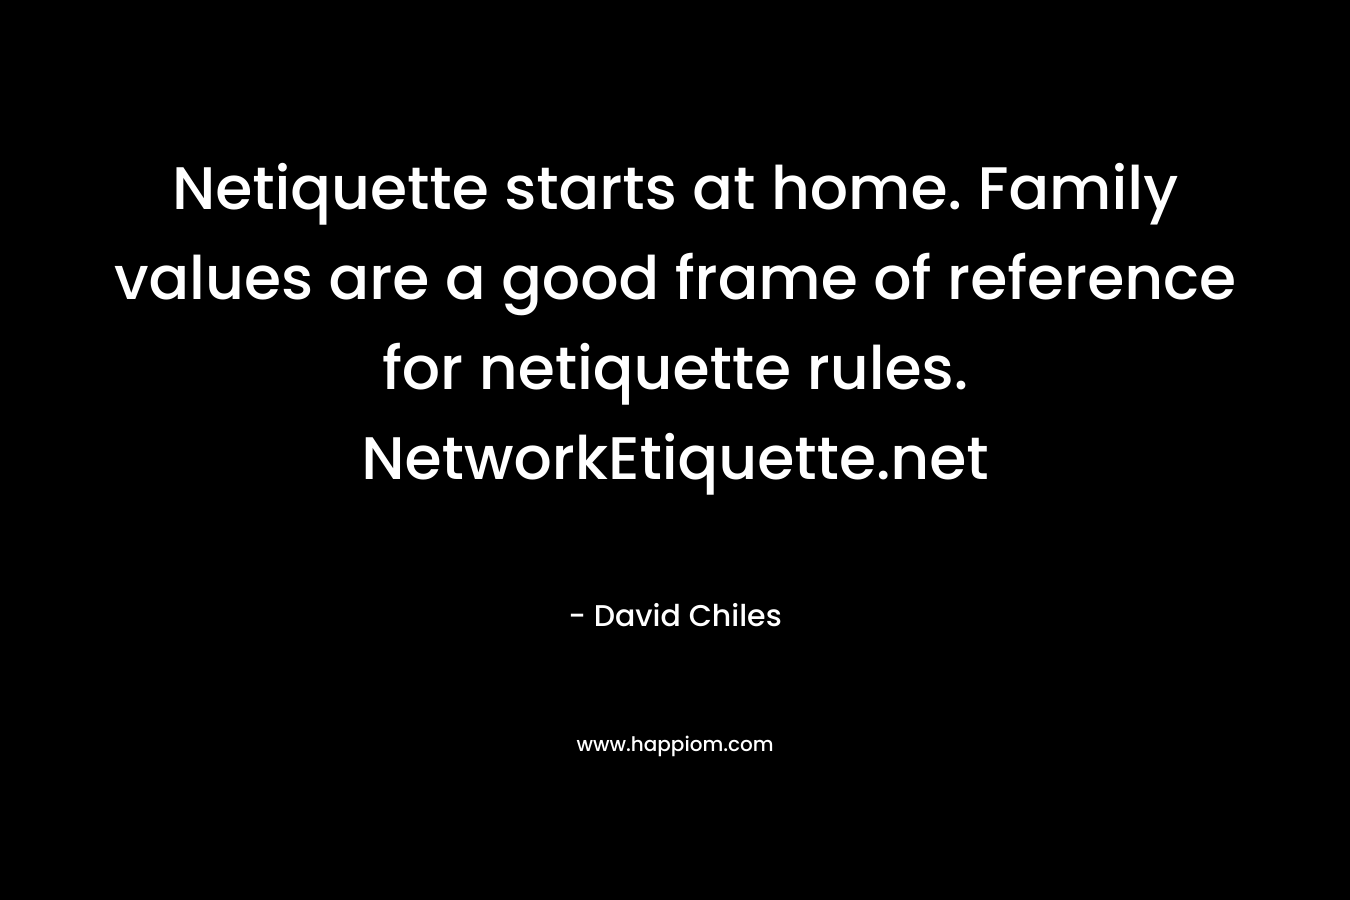 Netiquette starts at home. Family values are a good frame of reference for netiquette rules. NetworkEtiquette.net